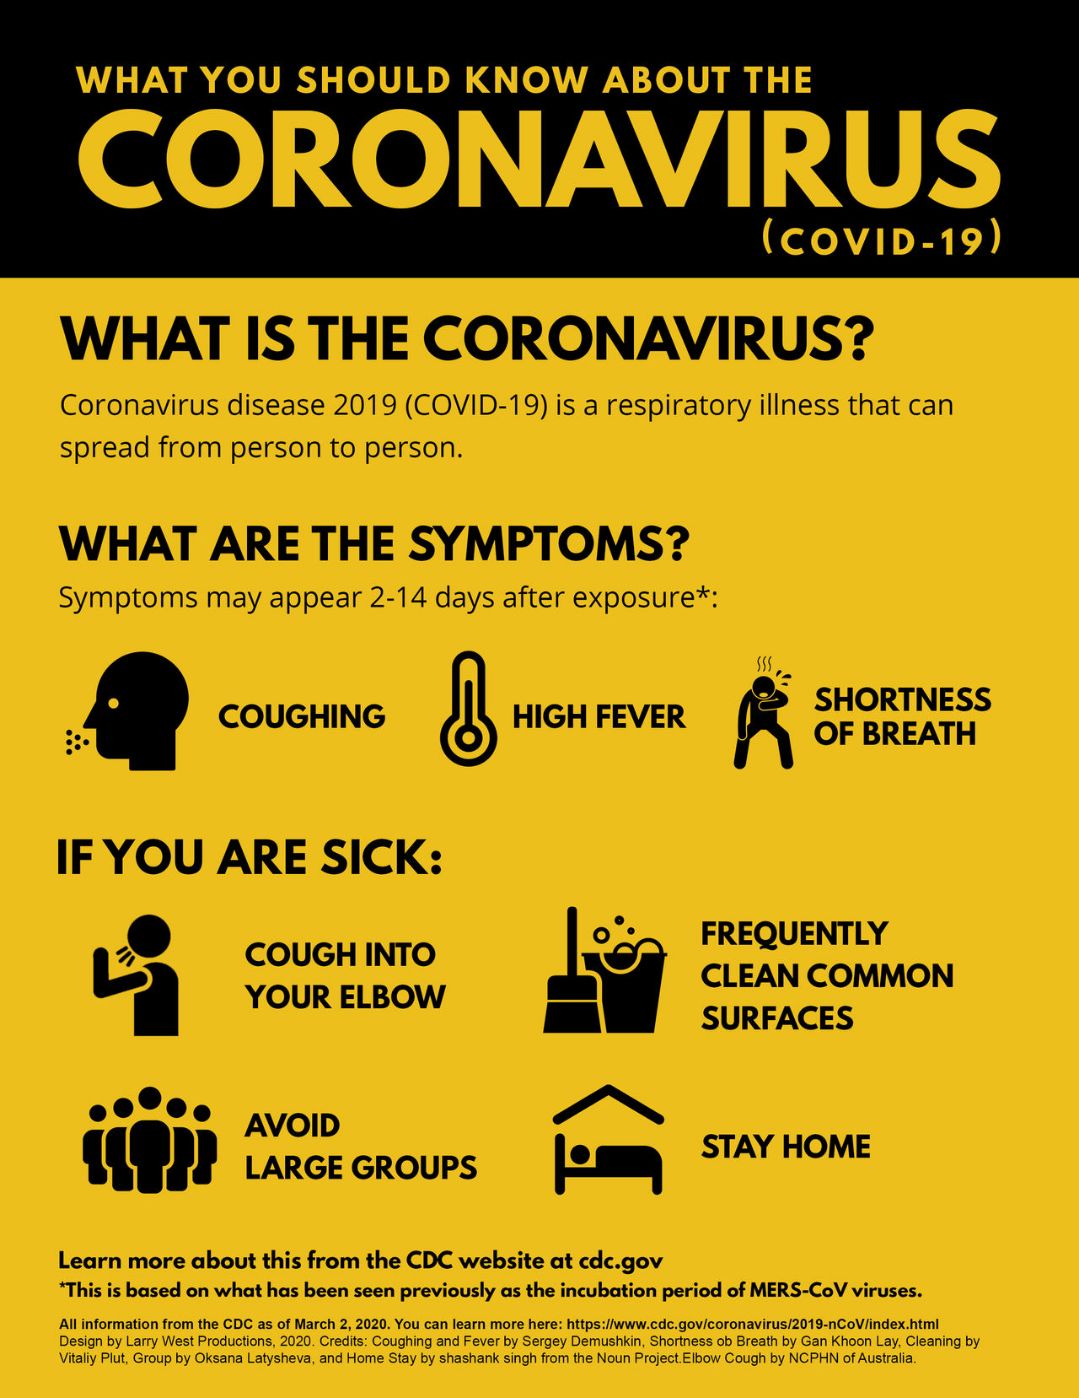 Do you have COVID-19? Poster